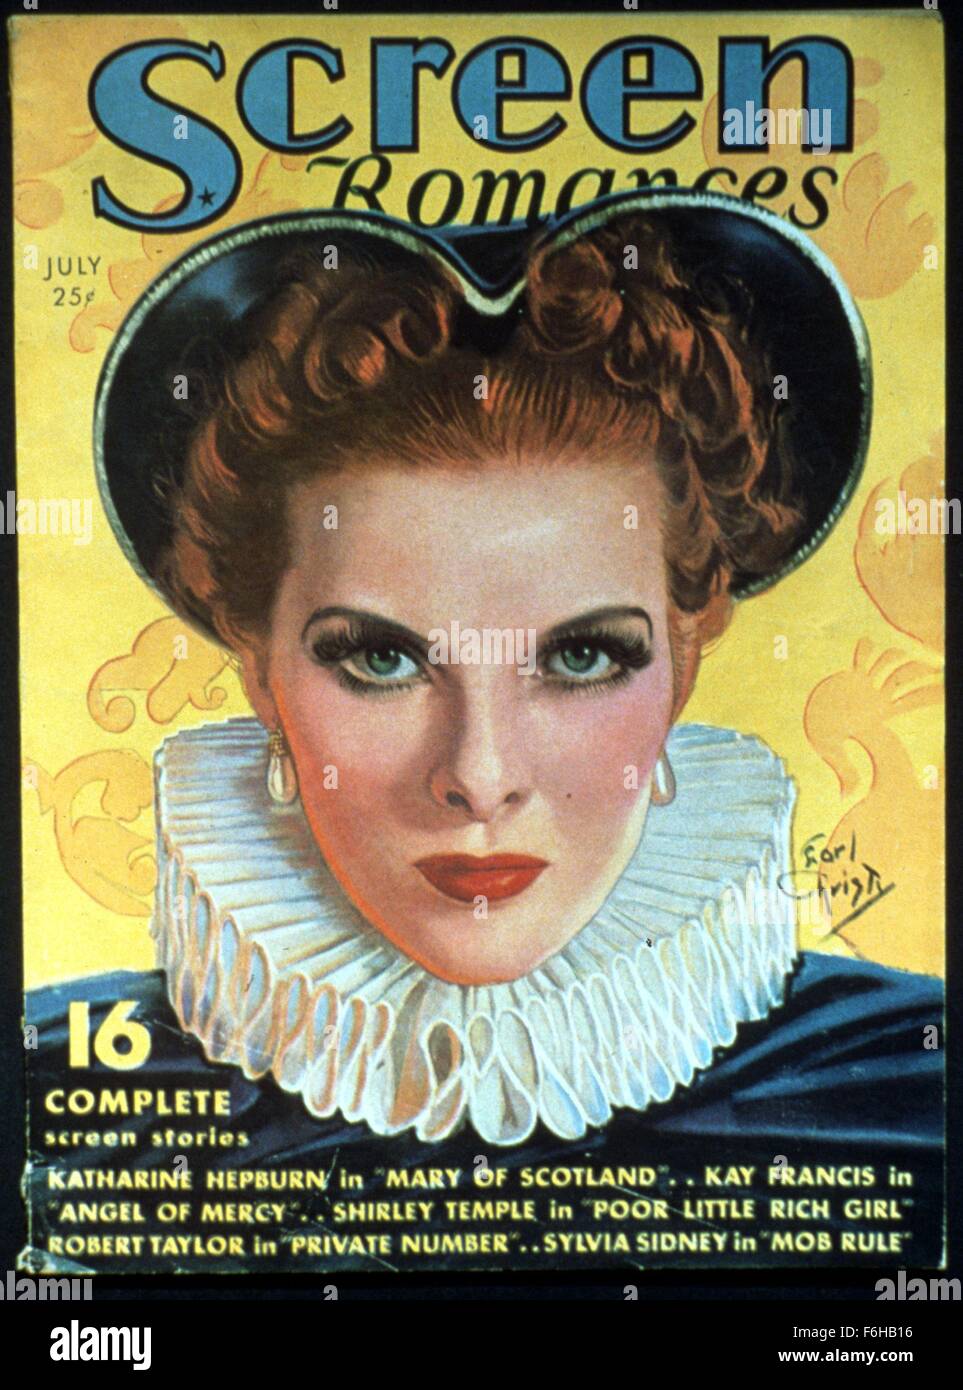 1936, Film Title: SCREEN ROMANCES, Pictured: KATHARINE HEPBURN, MAGAZINE COVER, MARY OF SCOTLAND, MARY QUEEN OF SCOTS, COVER ART, PORTRAIT, ILLUSTRATION, REGAL. (Credit Image: SNAP) Stock Photo